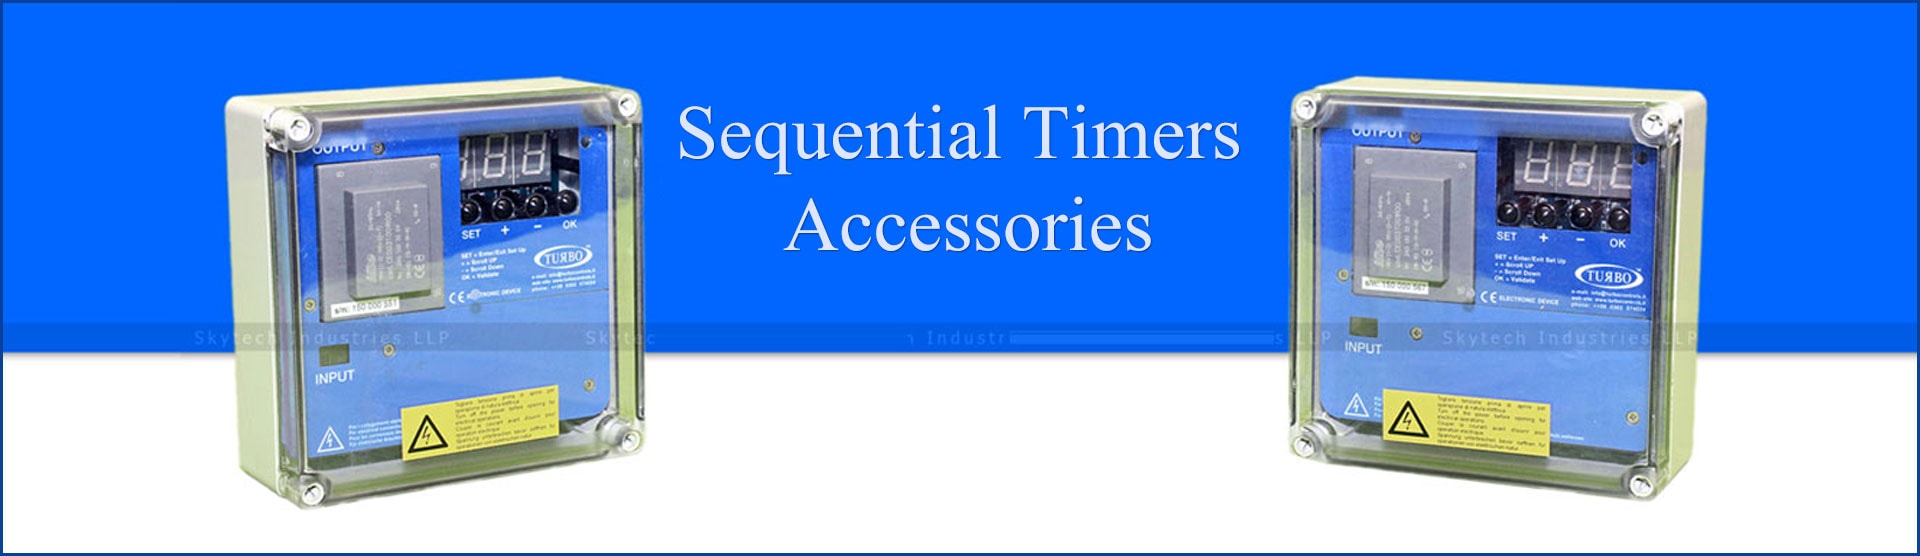 Sequential-Timers-Accessories